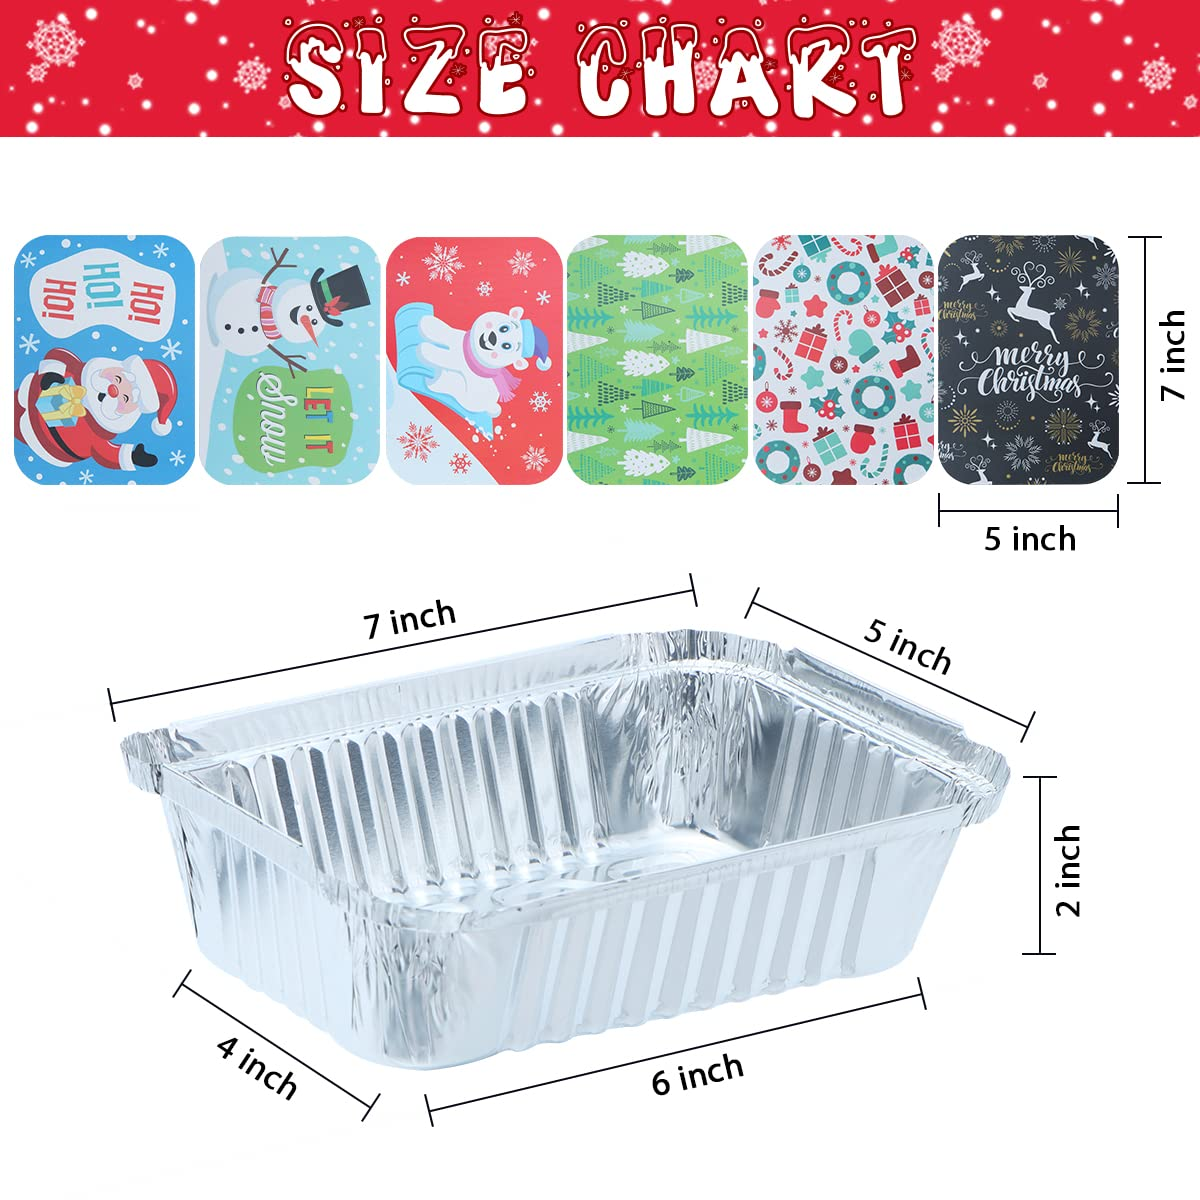 https://www.joyinusa.shop/wp-content/uploads/1692/00/christmas-cookie-tins-with-lids-36-pcs-joyin-discover-our-inspiring-assortment-of-products_6.png